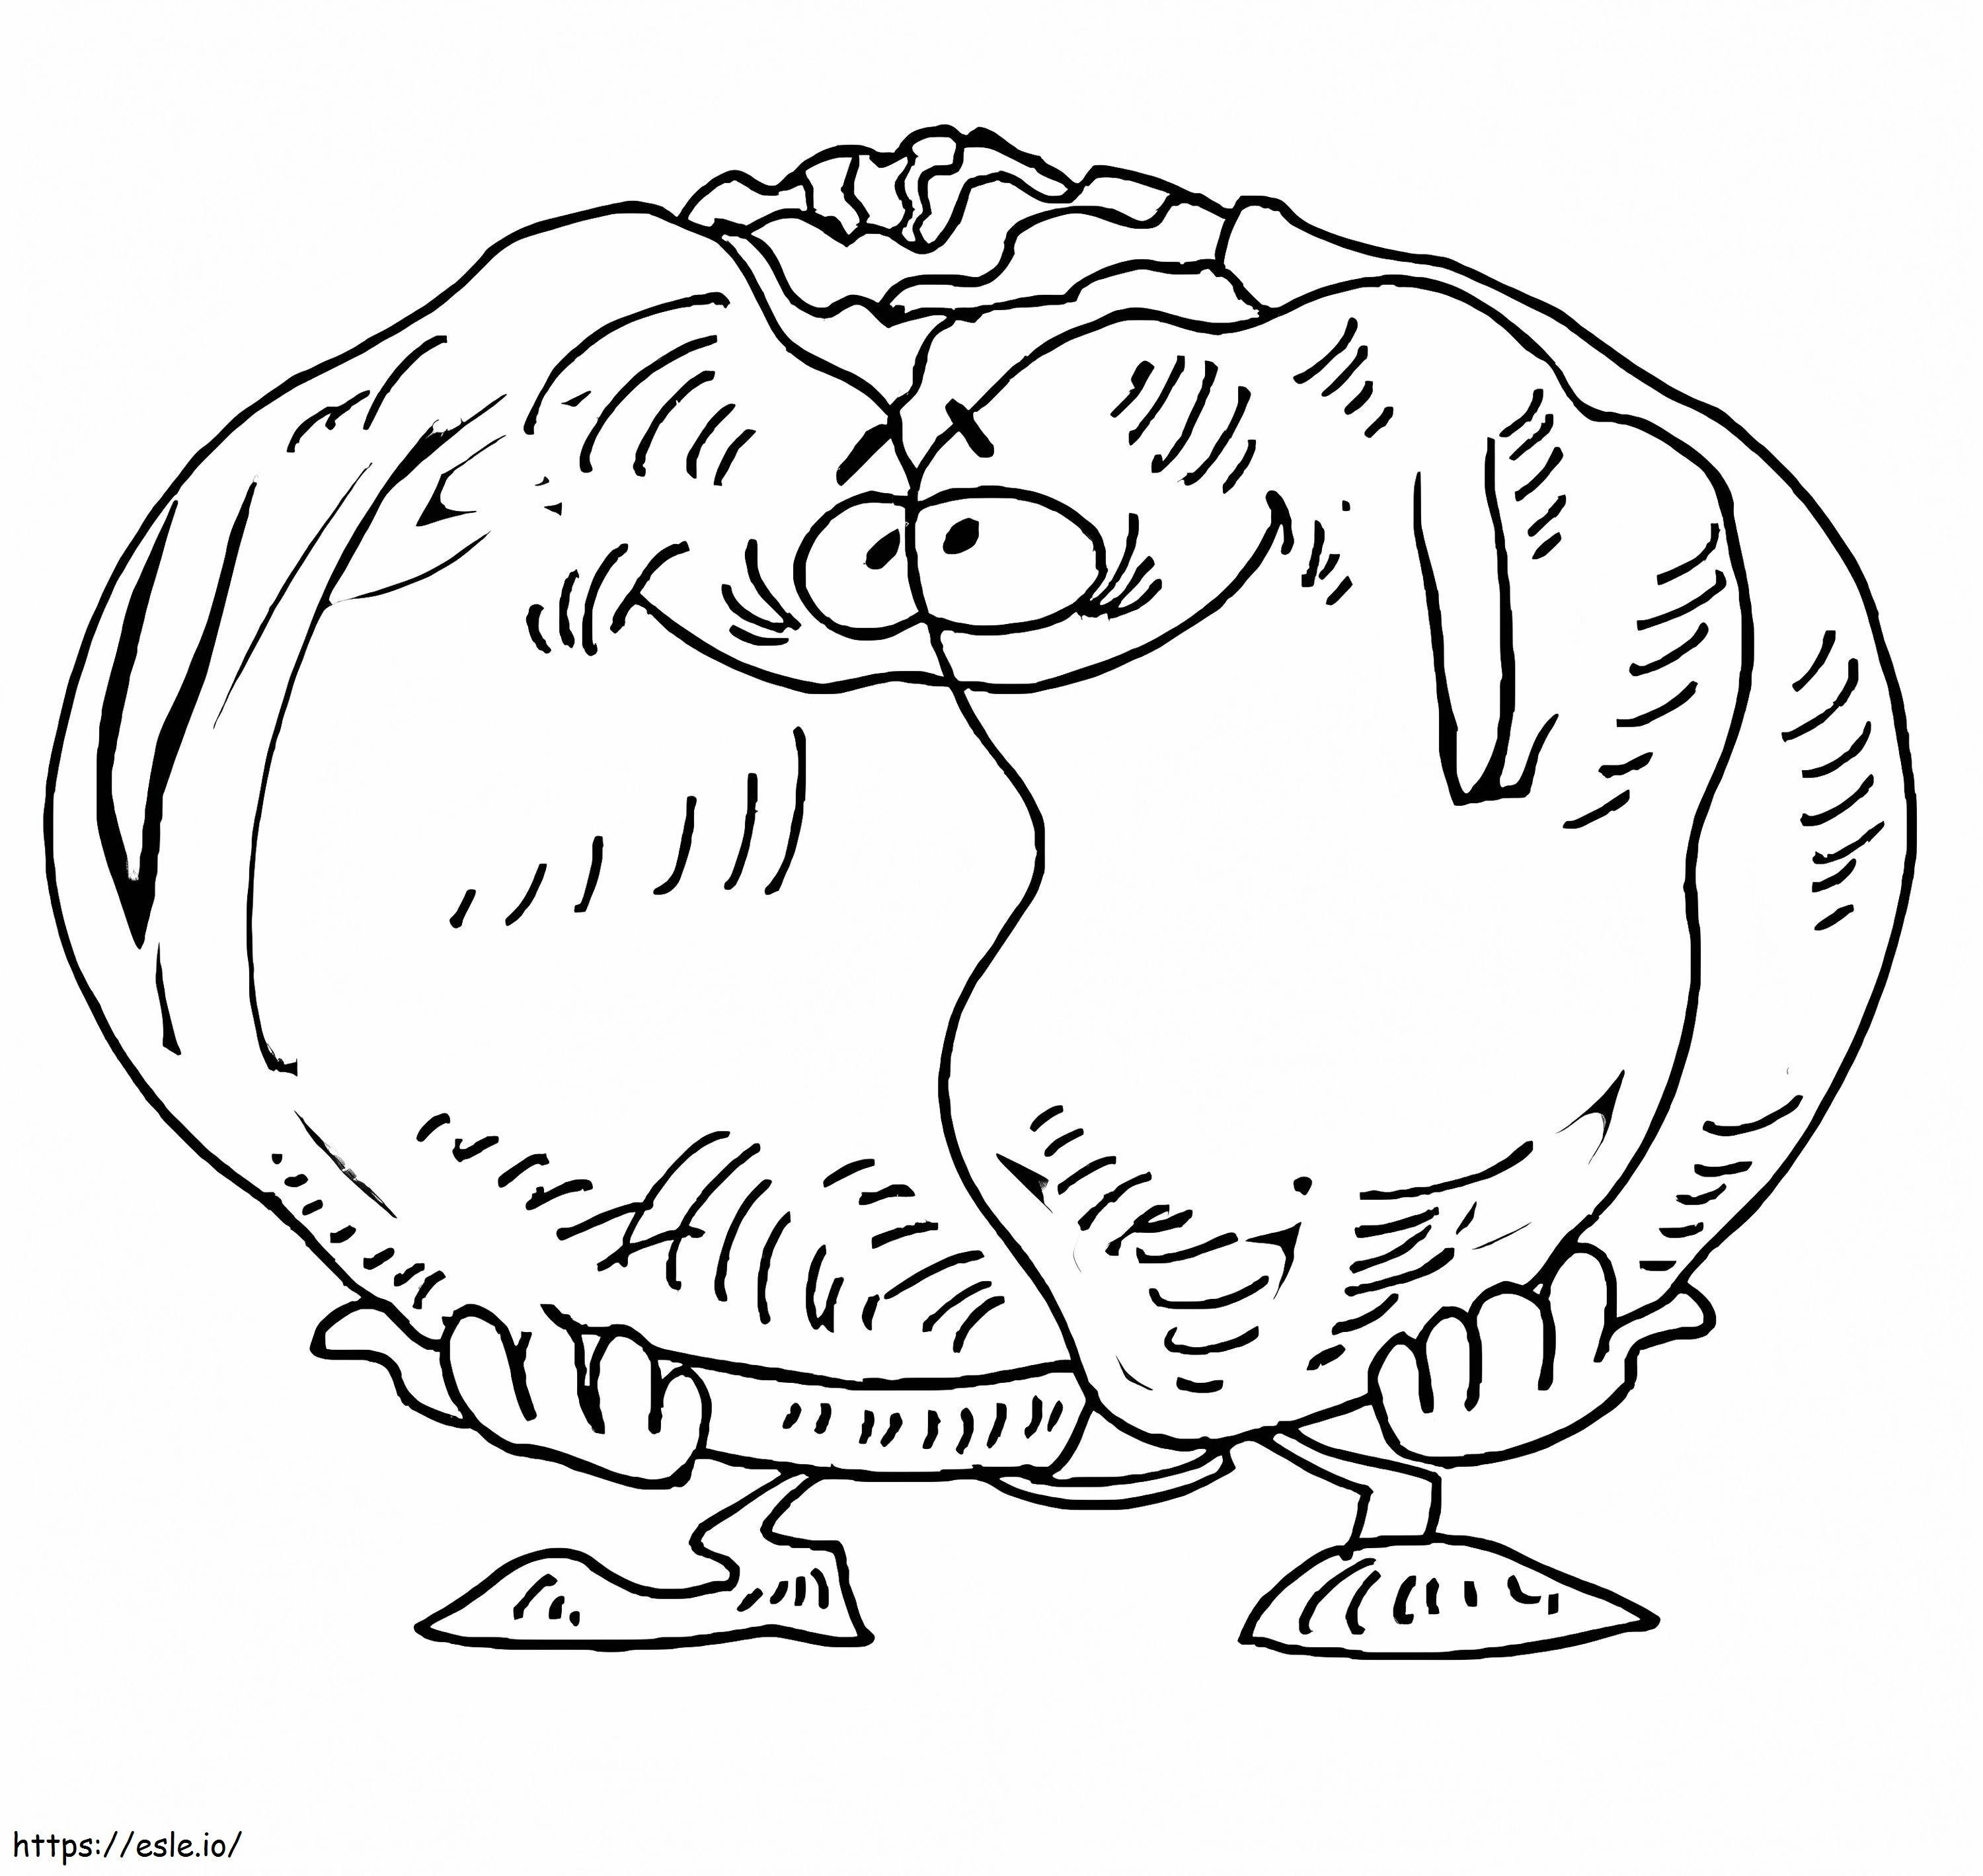 Cabbage Smiling coloring page